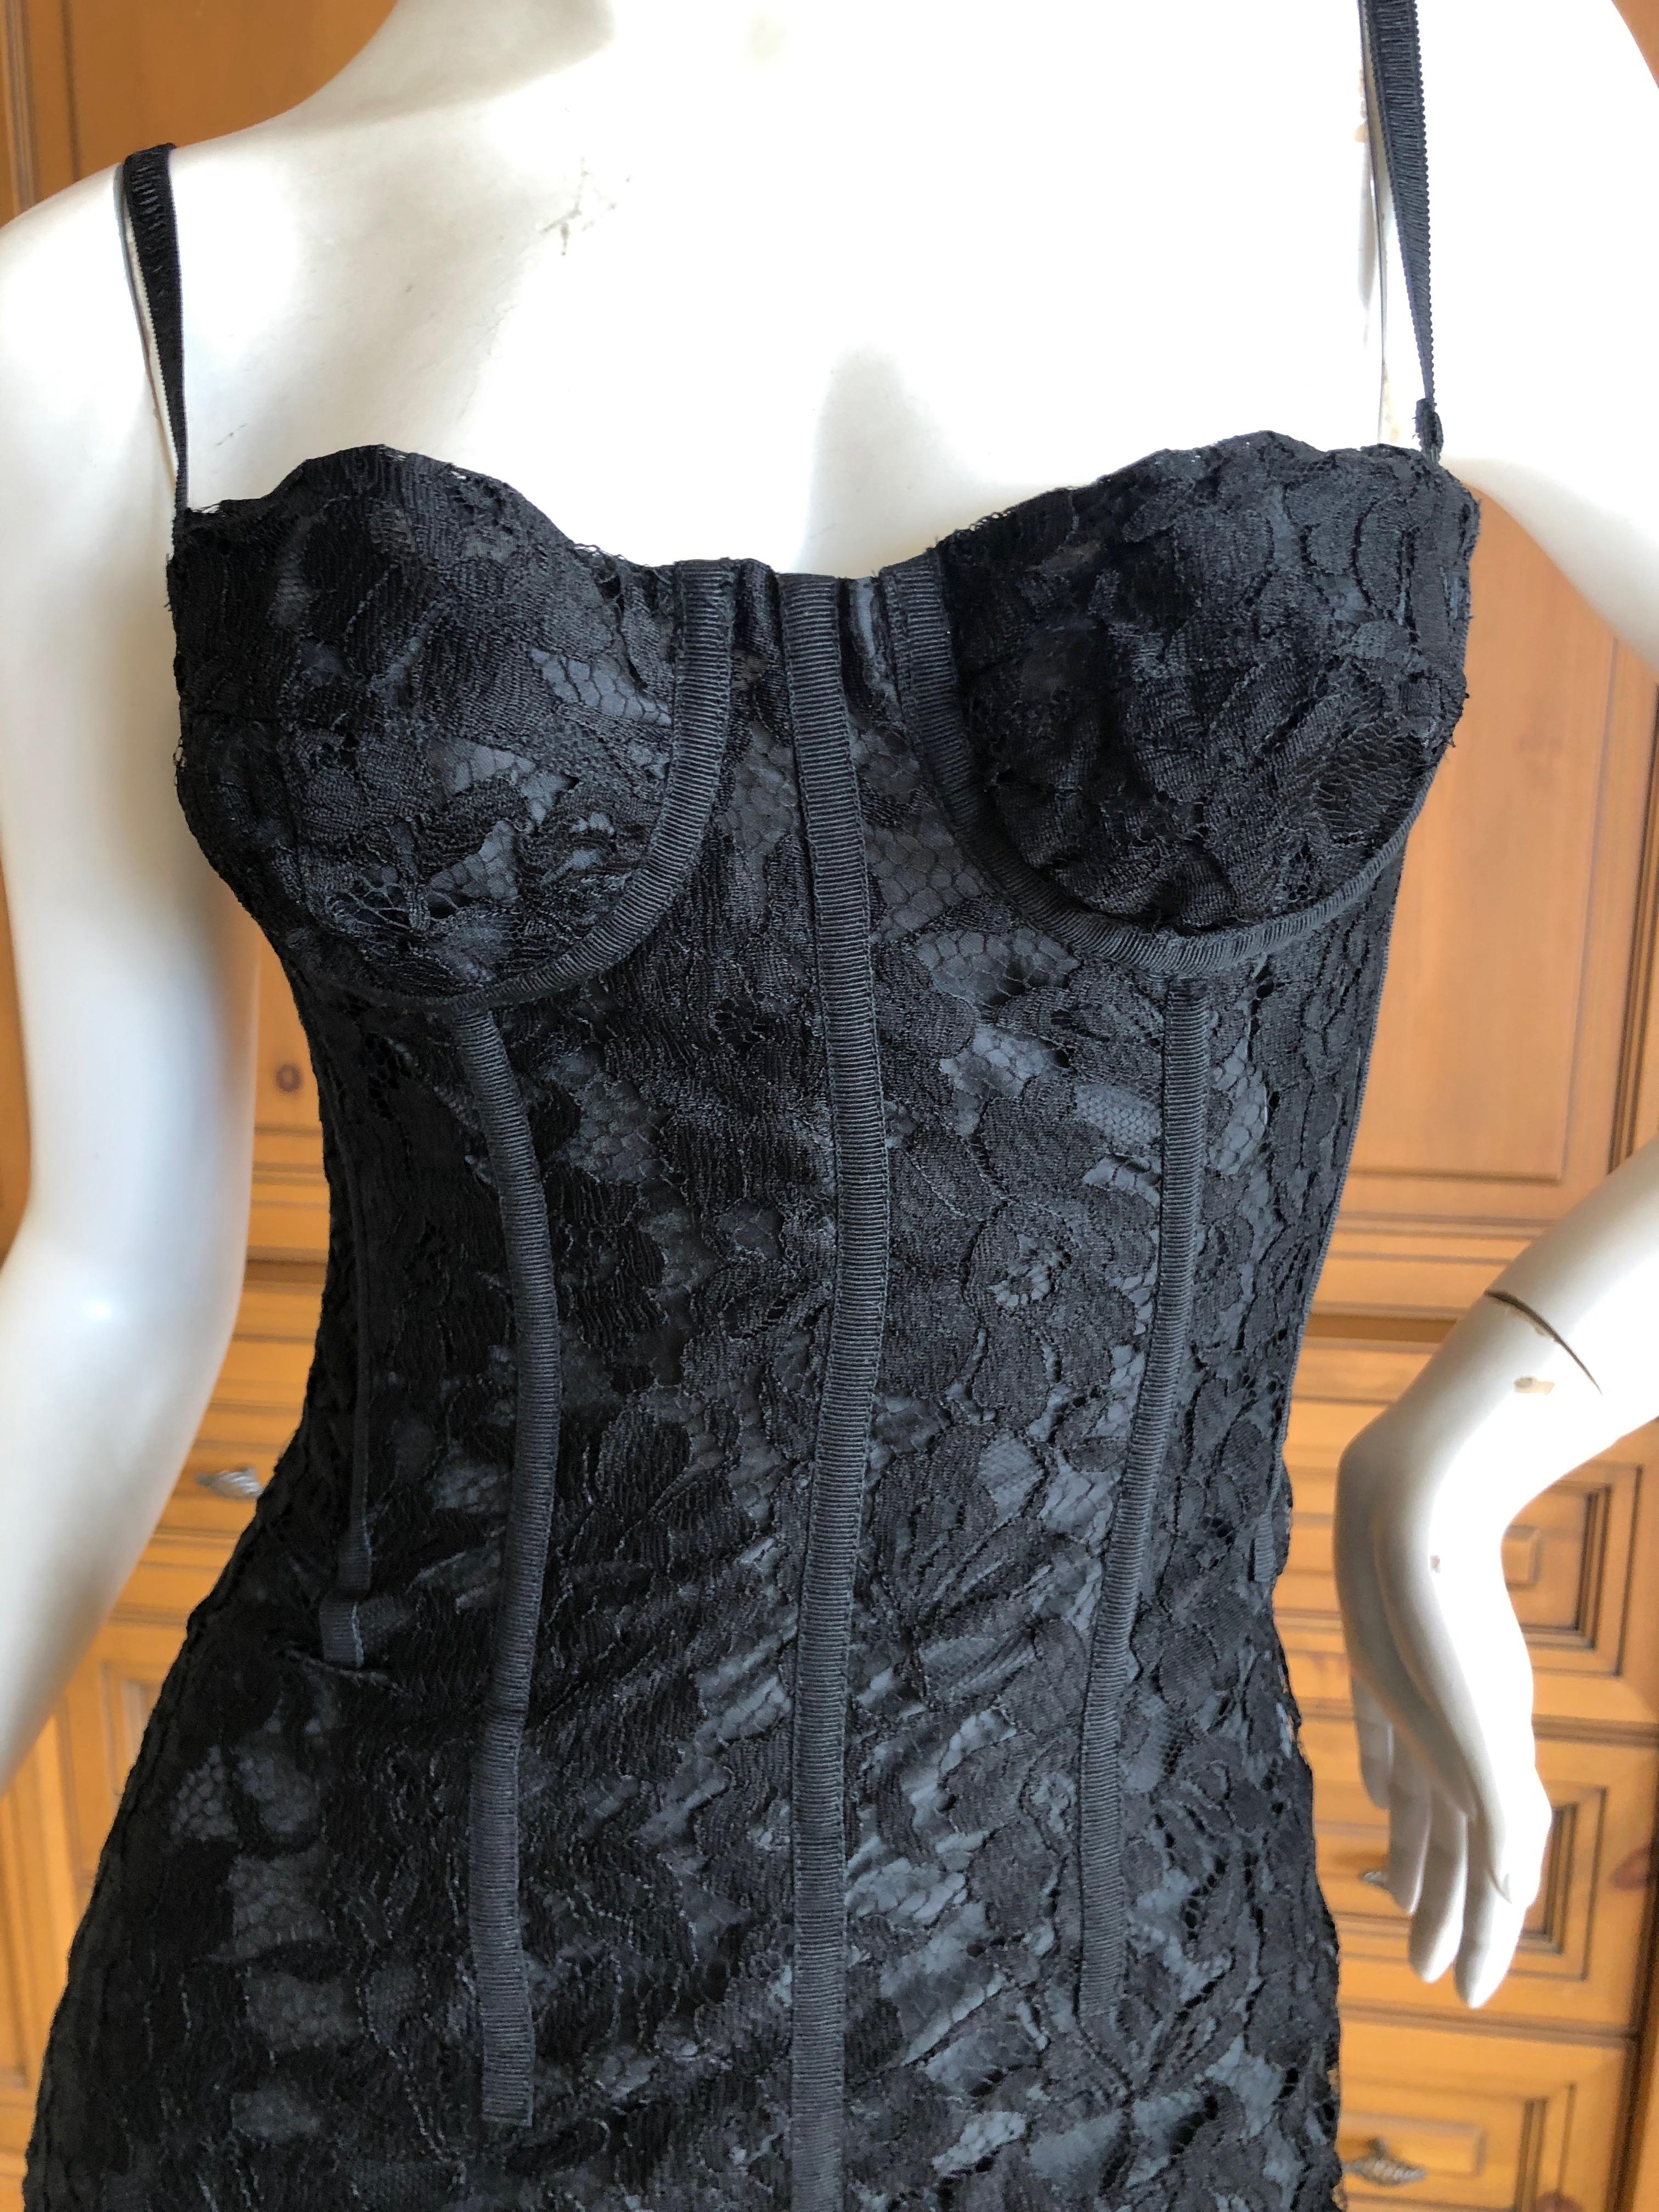 Dolce & Gabbana D&G Vintage BLack Lace Corset Dress
Semi sheer with a lot of stretch
Size 36
Bust 32